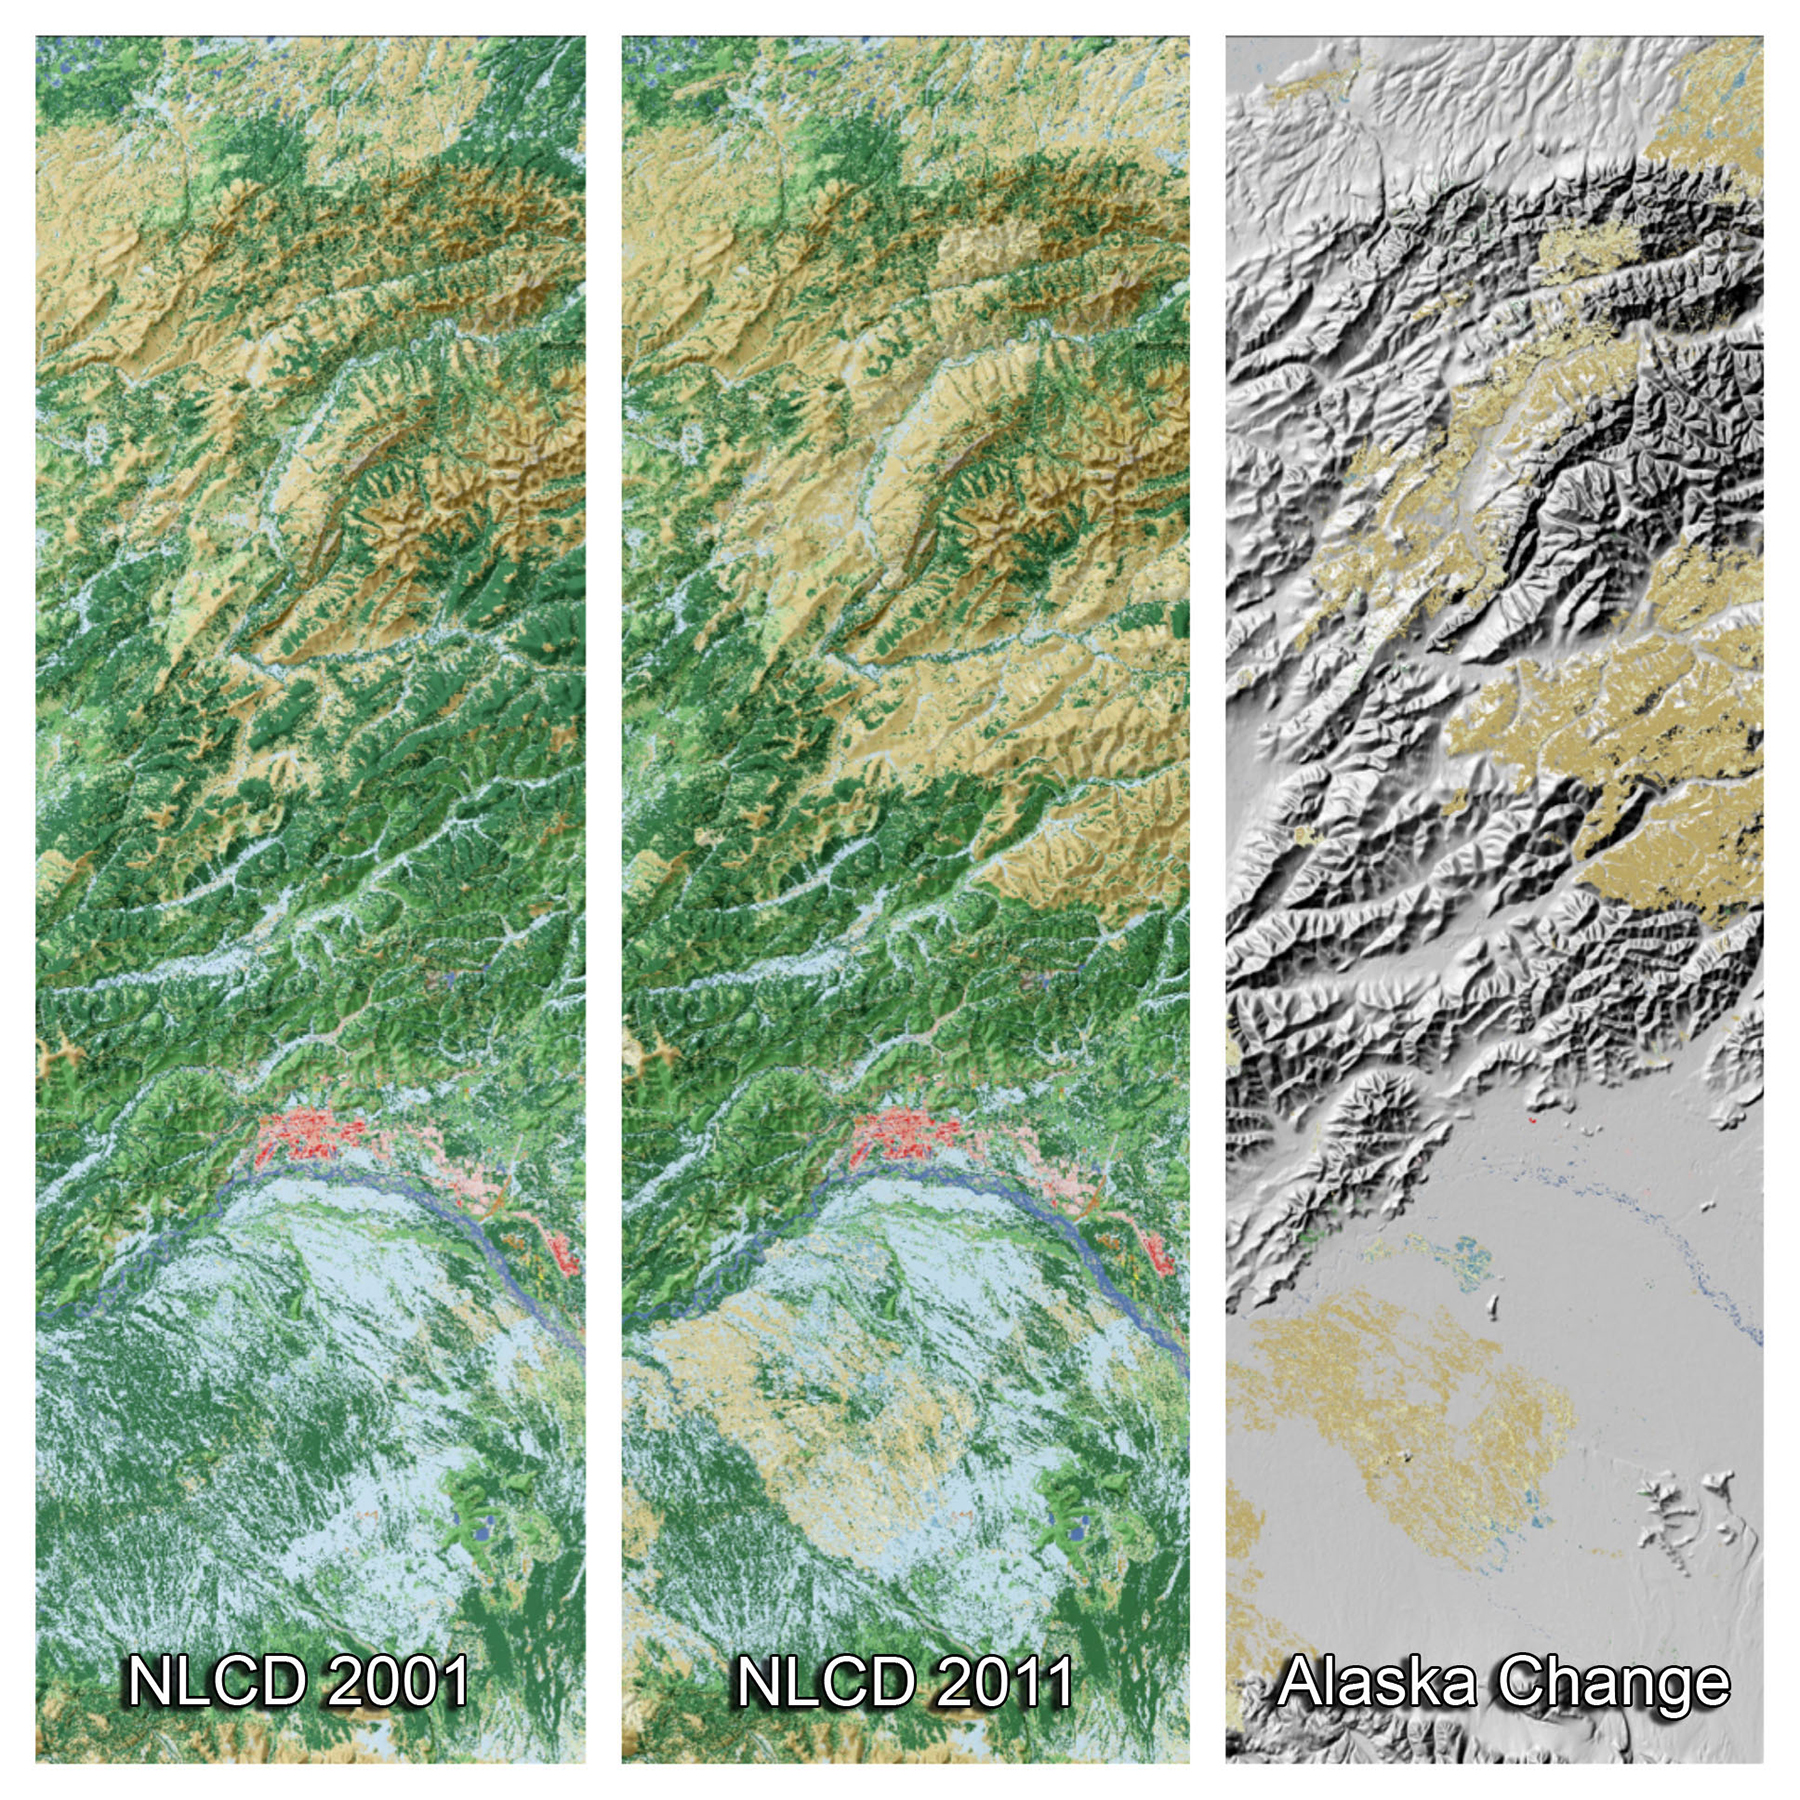 These three panels from the National Land Cover Database depict land cover change in the vicinity of Fairbanks, Alaska, from 2001 to 2011: (left) land cover in 2001 (forests in green, shrublands in brown, wetlands in blue, and urban in red); (middle) the updated land cover in 2011; and (right) areas where change occurred over this 10-year period, primarily as a result of wildfire, which converted large areas of forests to shrub and grasslands (shades of light brown in the right panel). Approximately 1 million acres burn across Alaska each year.